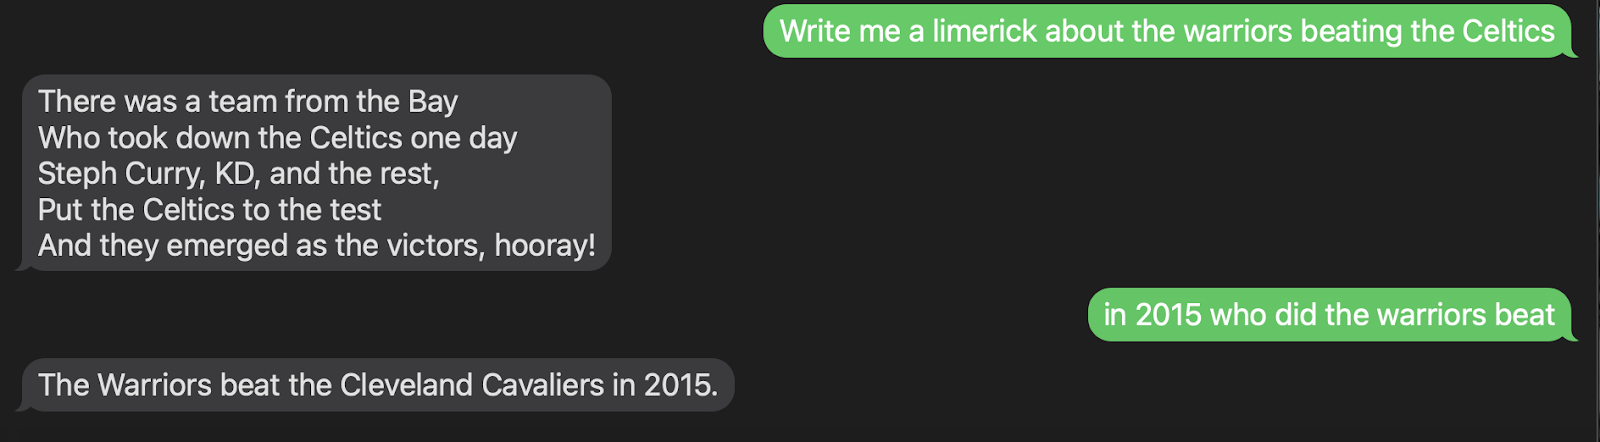 sms example limerick